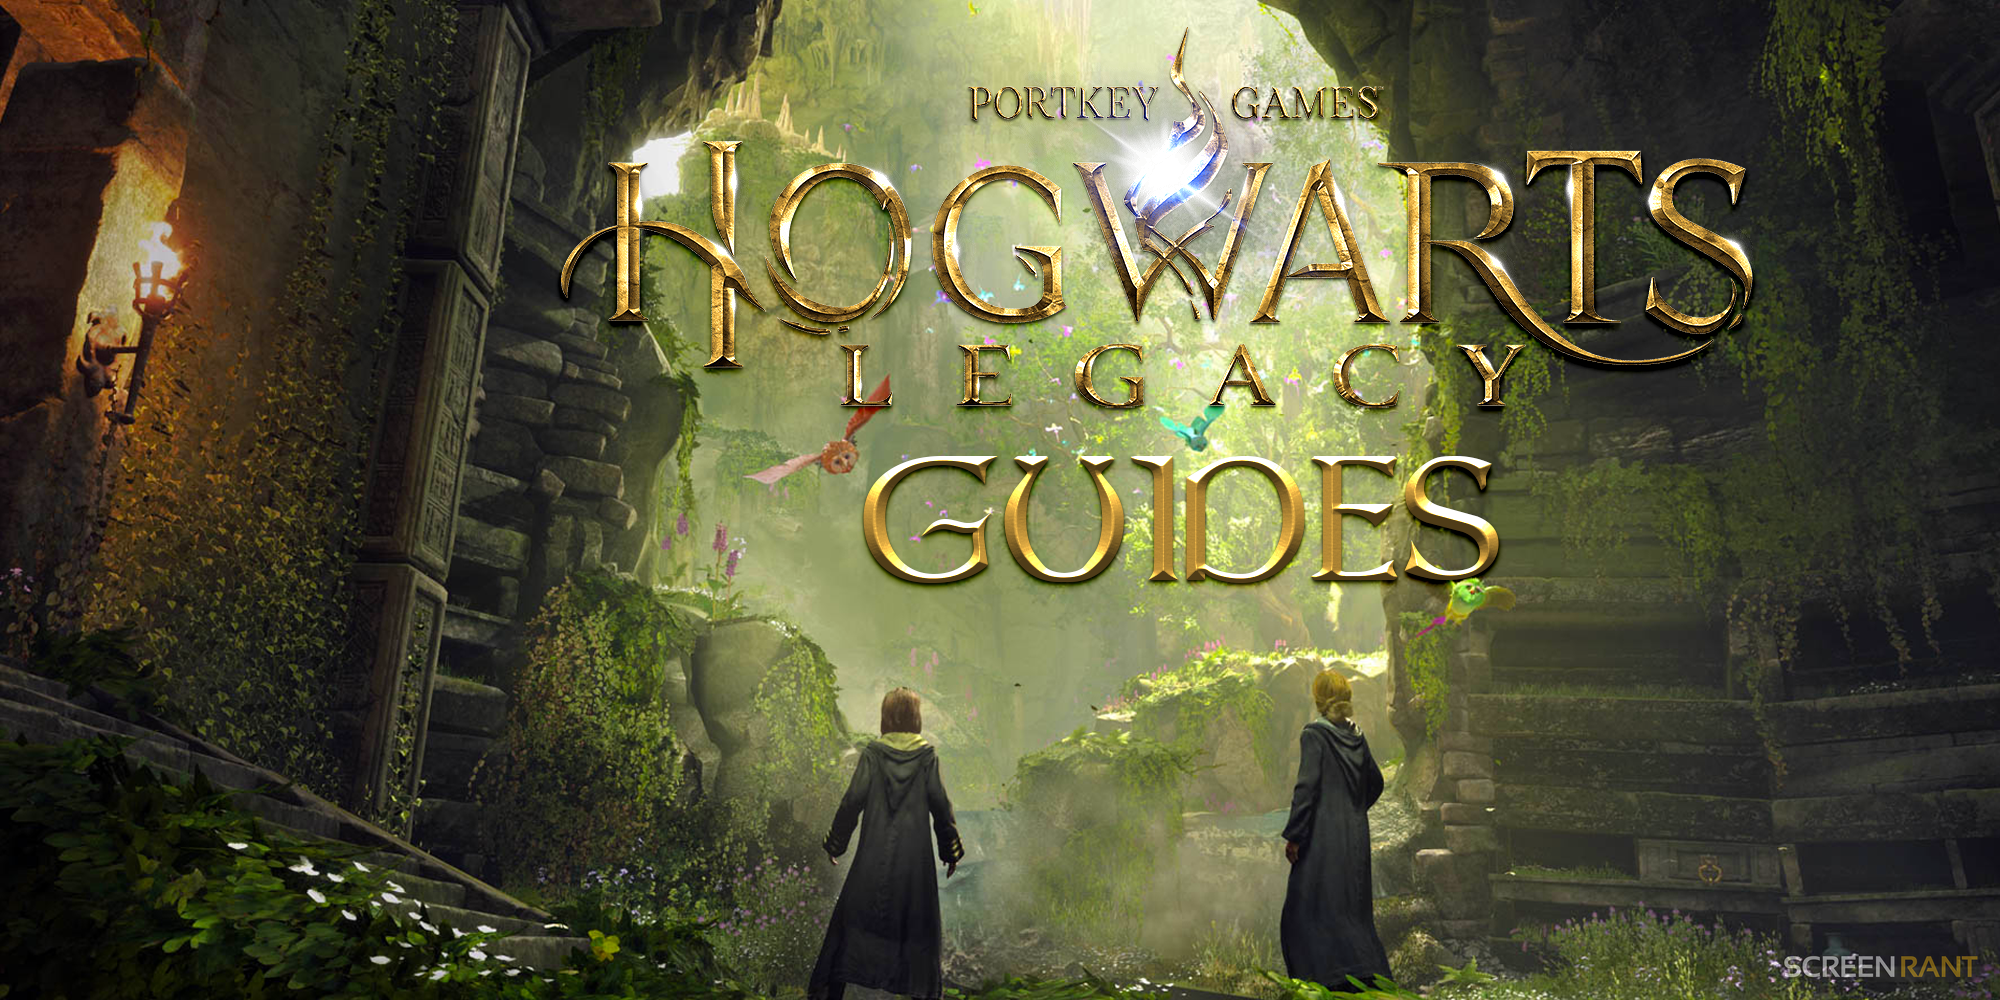 Hogwarts Legacy Guide: Walkthrough, Tips and Tricks, and All